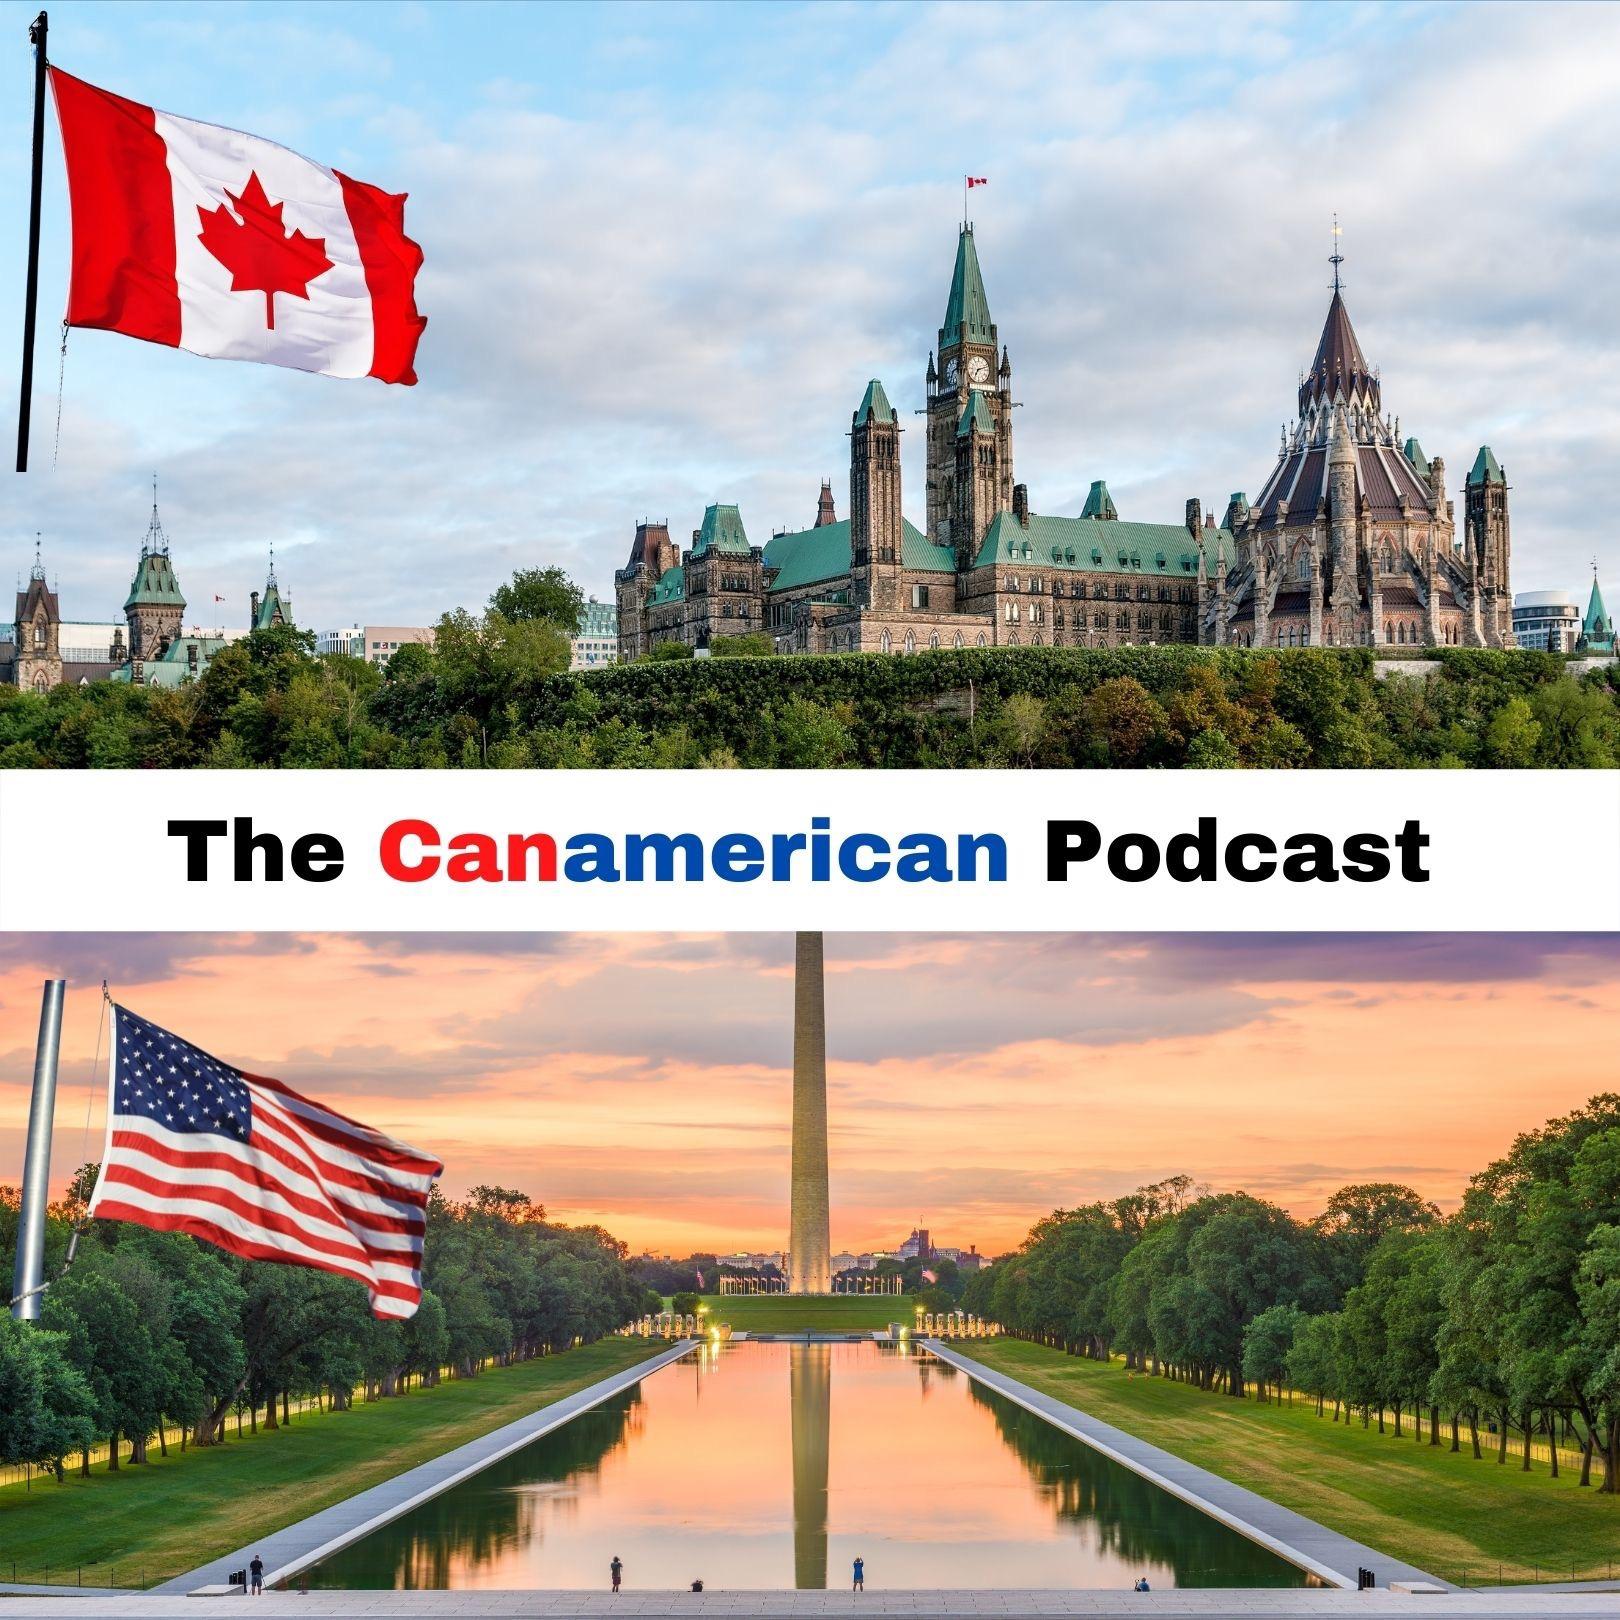 The Canamerican Podcast